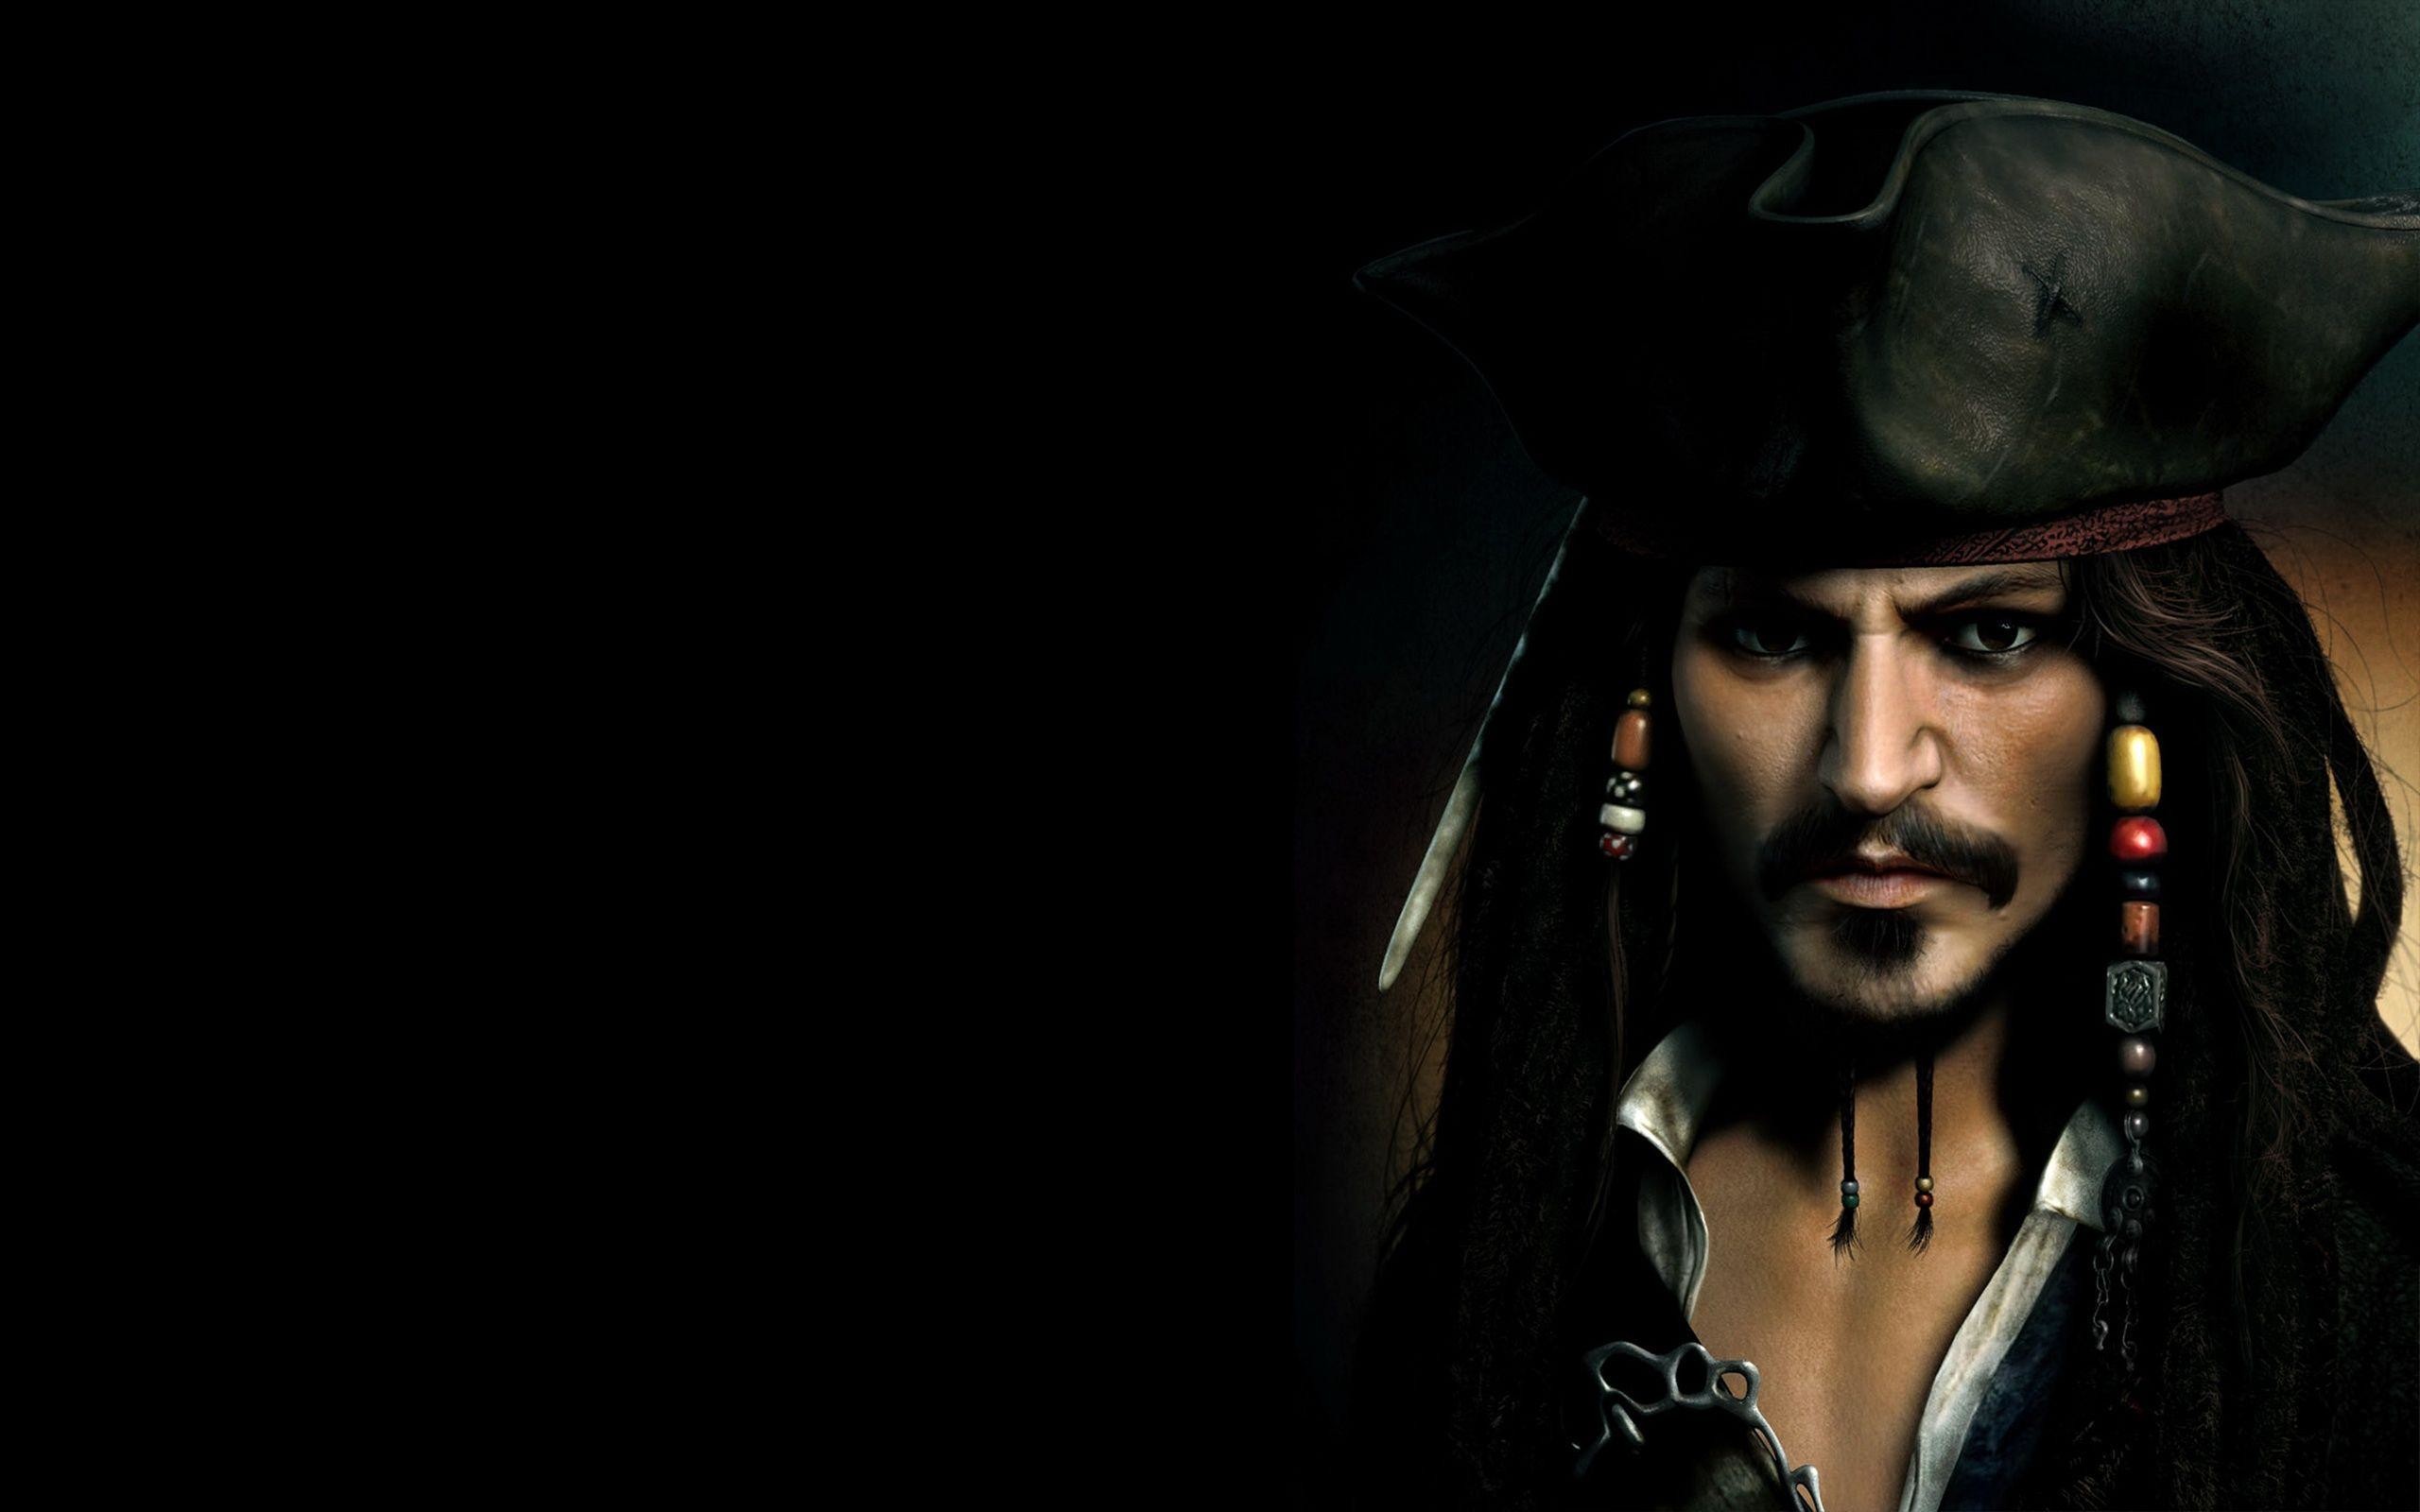 2560x1600 Pirates of the Caribbean wallpaper